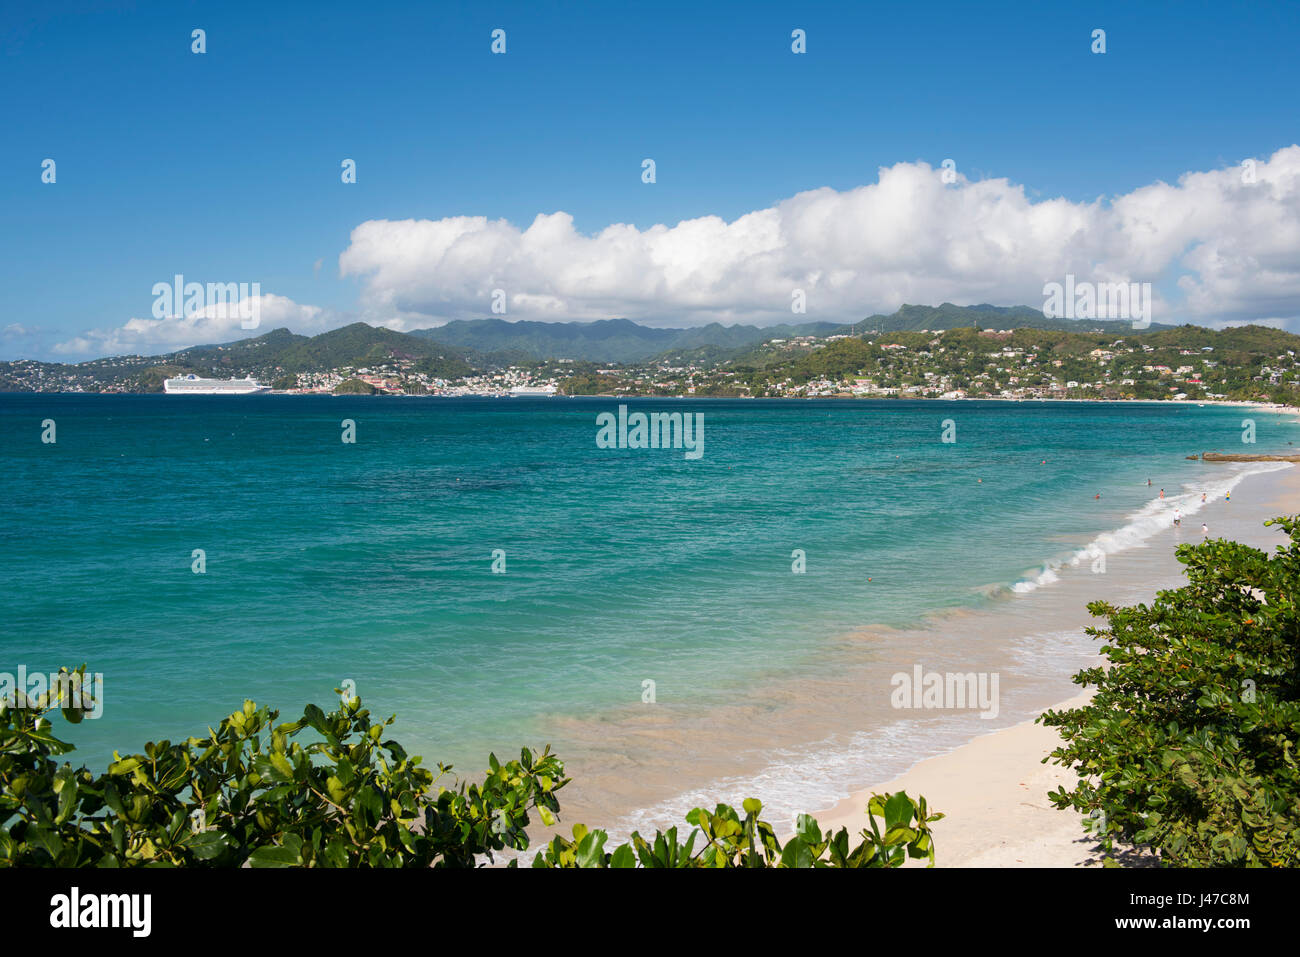 A view over Grand Anse looking toward St. George's in Grenada, West Indies, The Caribbean Stock Photo